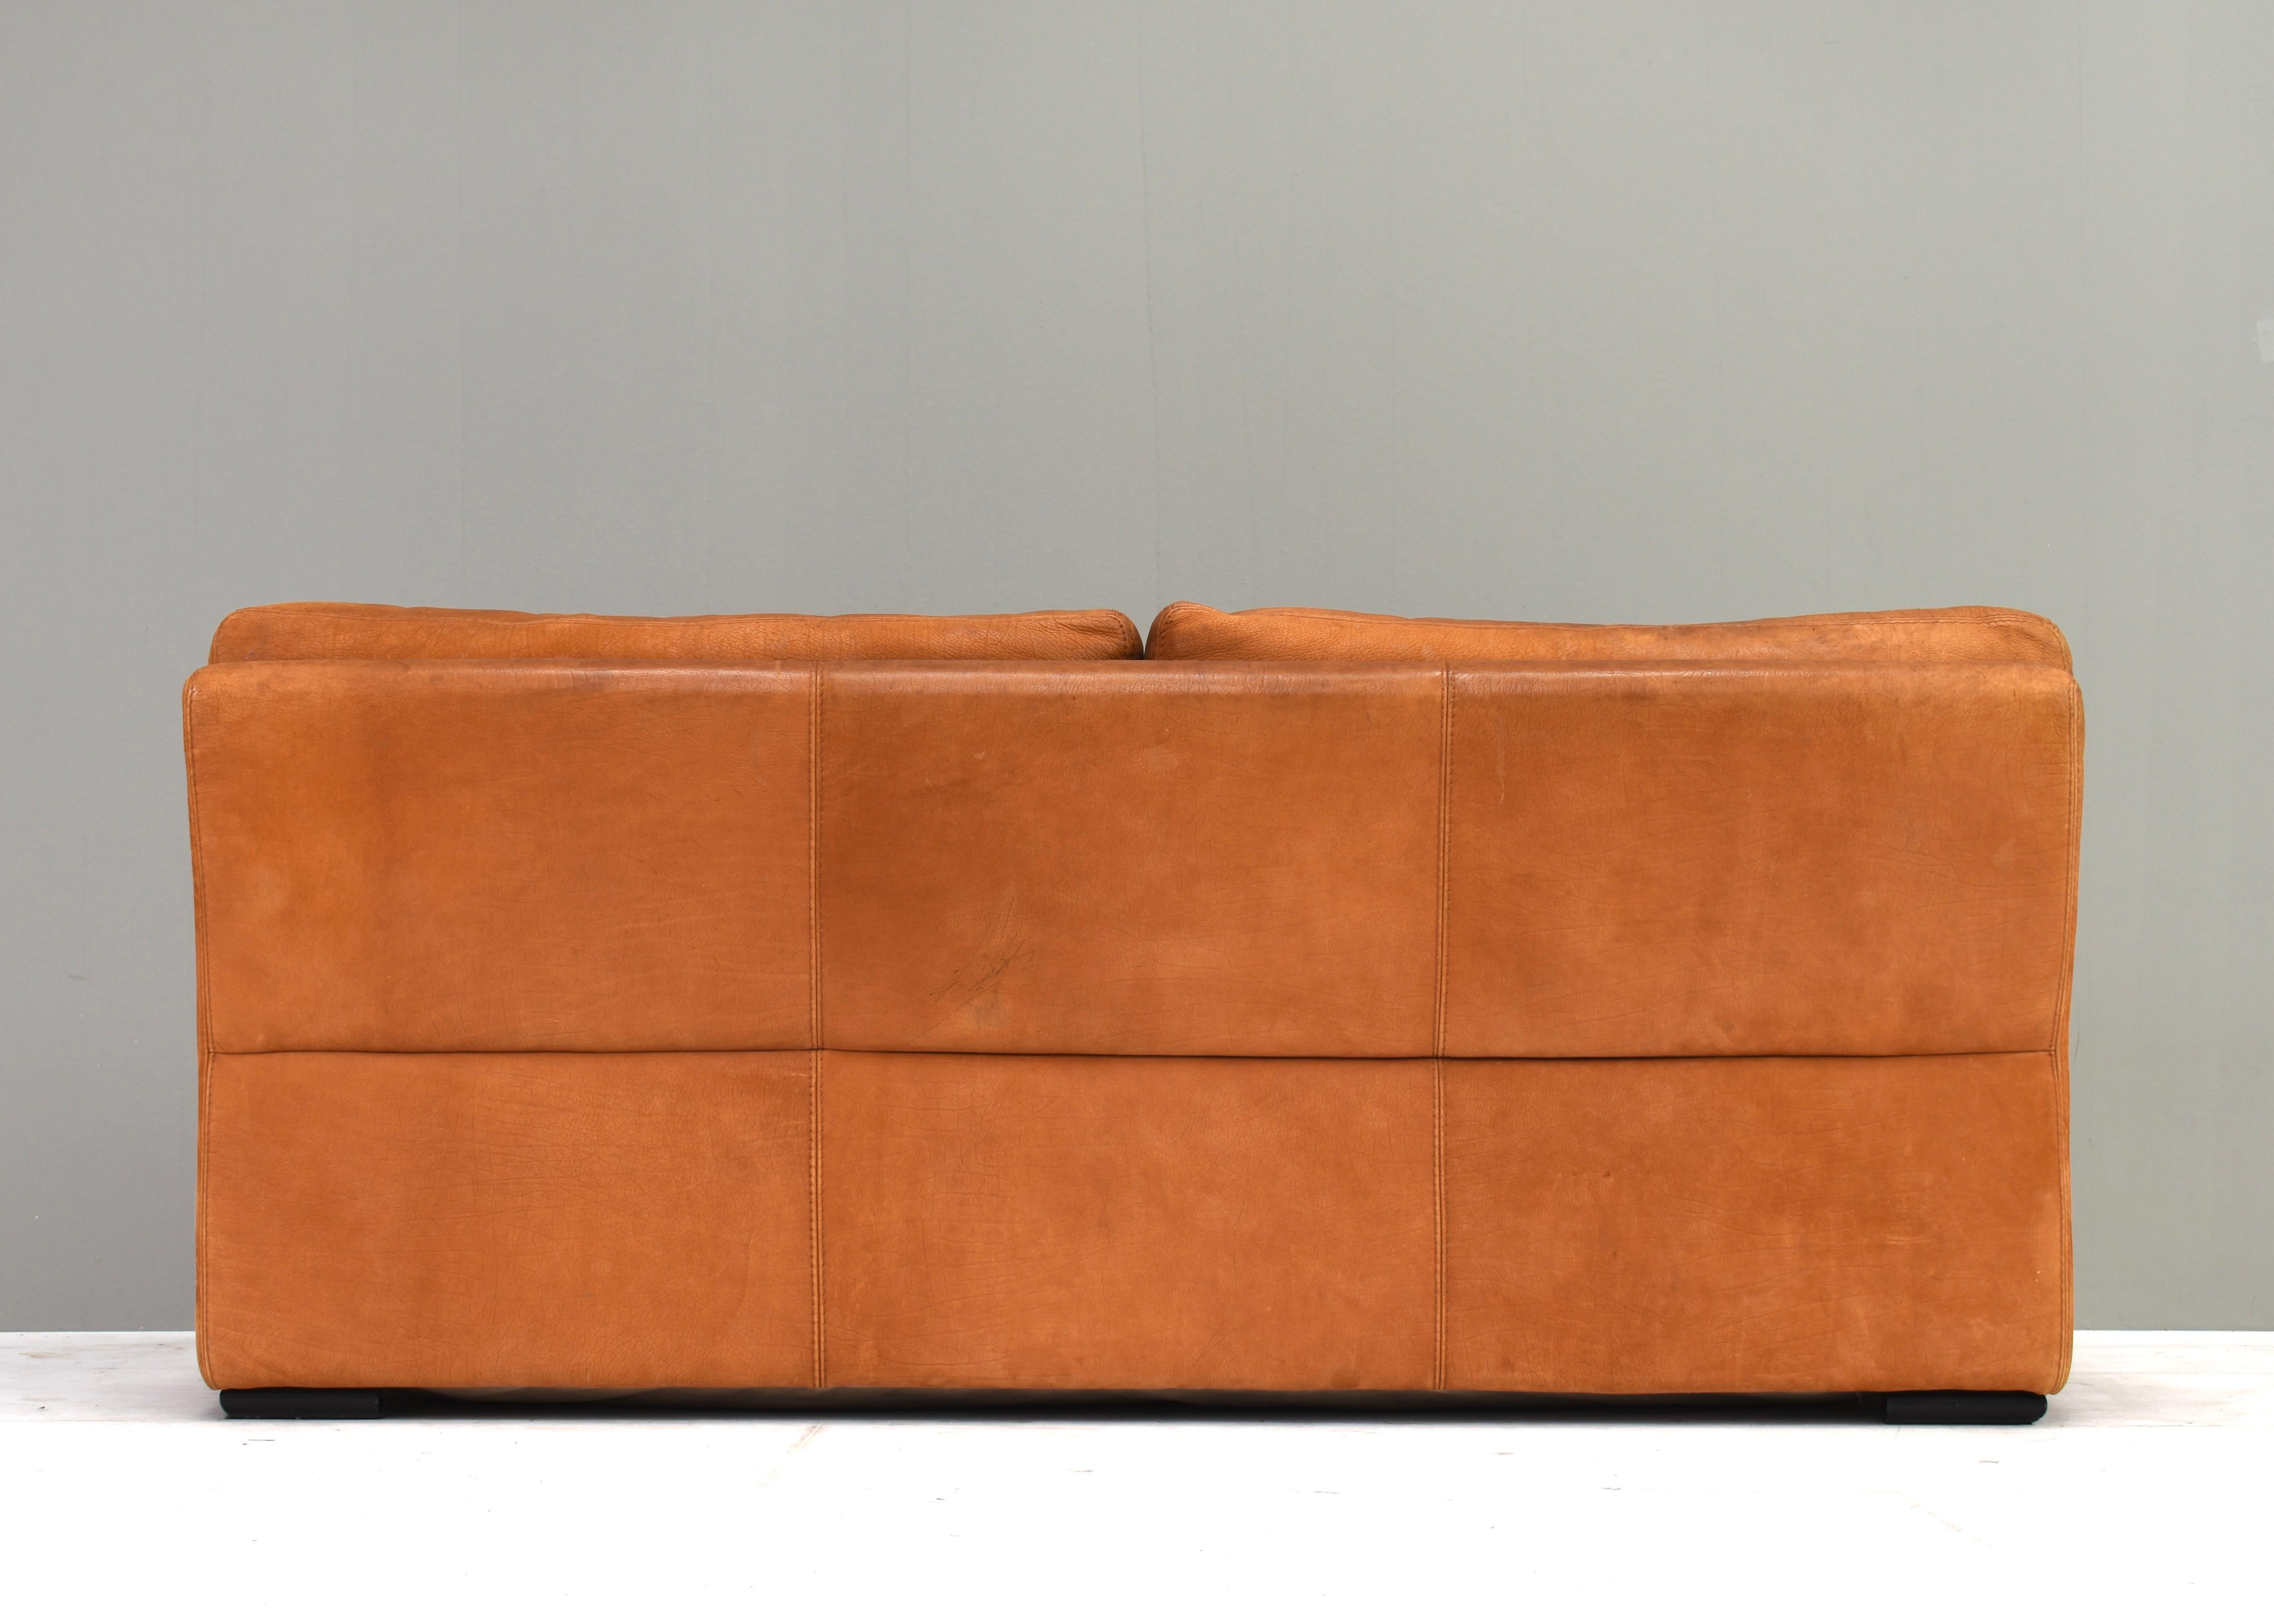 French Roche Bobois sofa in patinated Tan / Cognac leather – France, circa 1970/80 For Sale